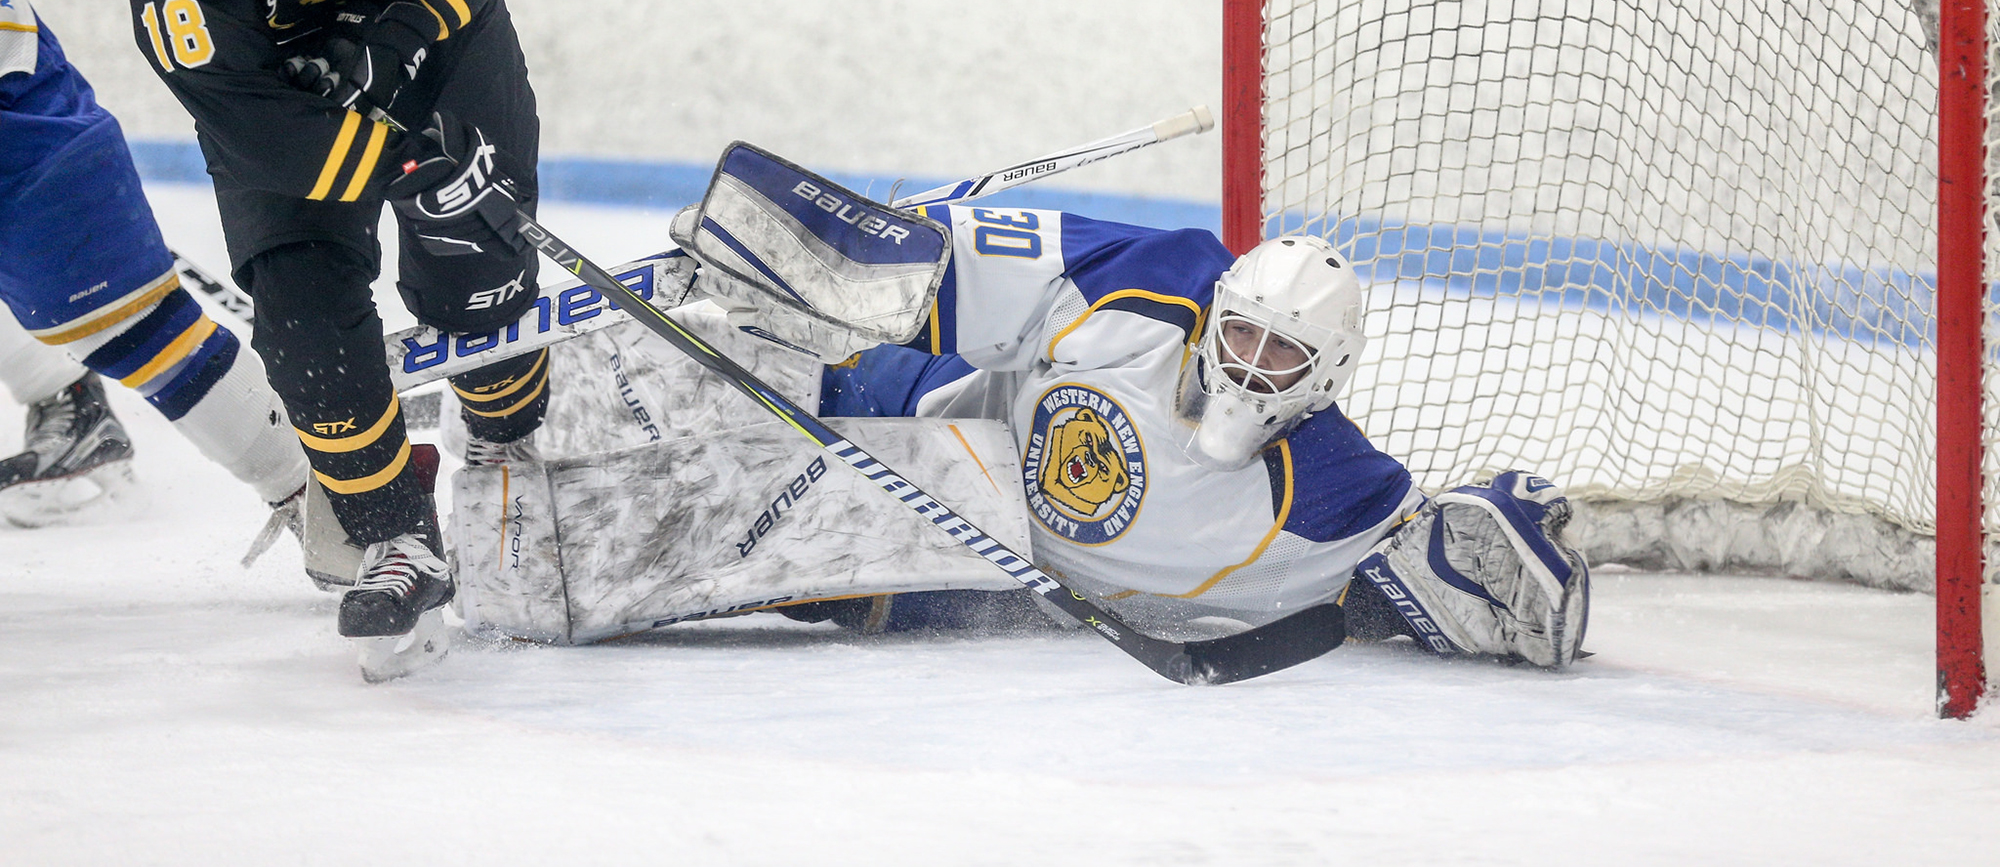 Baylee Johns made 22 saves in Western New England's 4-0 loss to Nichols on Saturday. (Photo by Chris Marion)